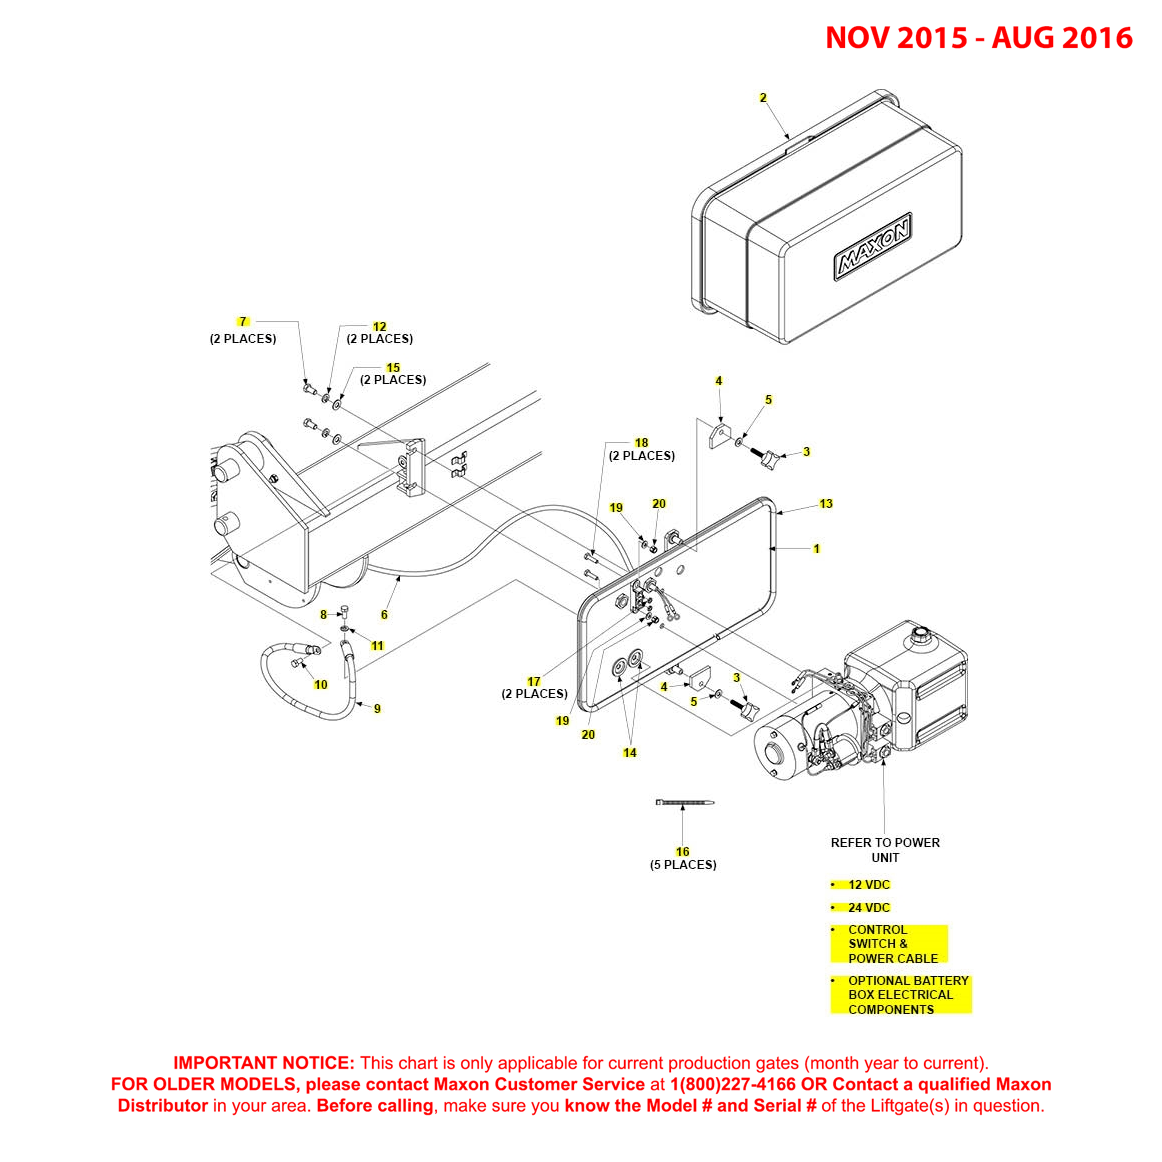 Maxon GPTWR (Nov 2015 - Aug 2016) Pump Cover And Mounting Plate Assembly Diagram